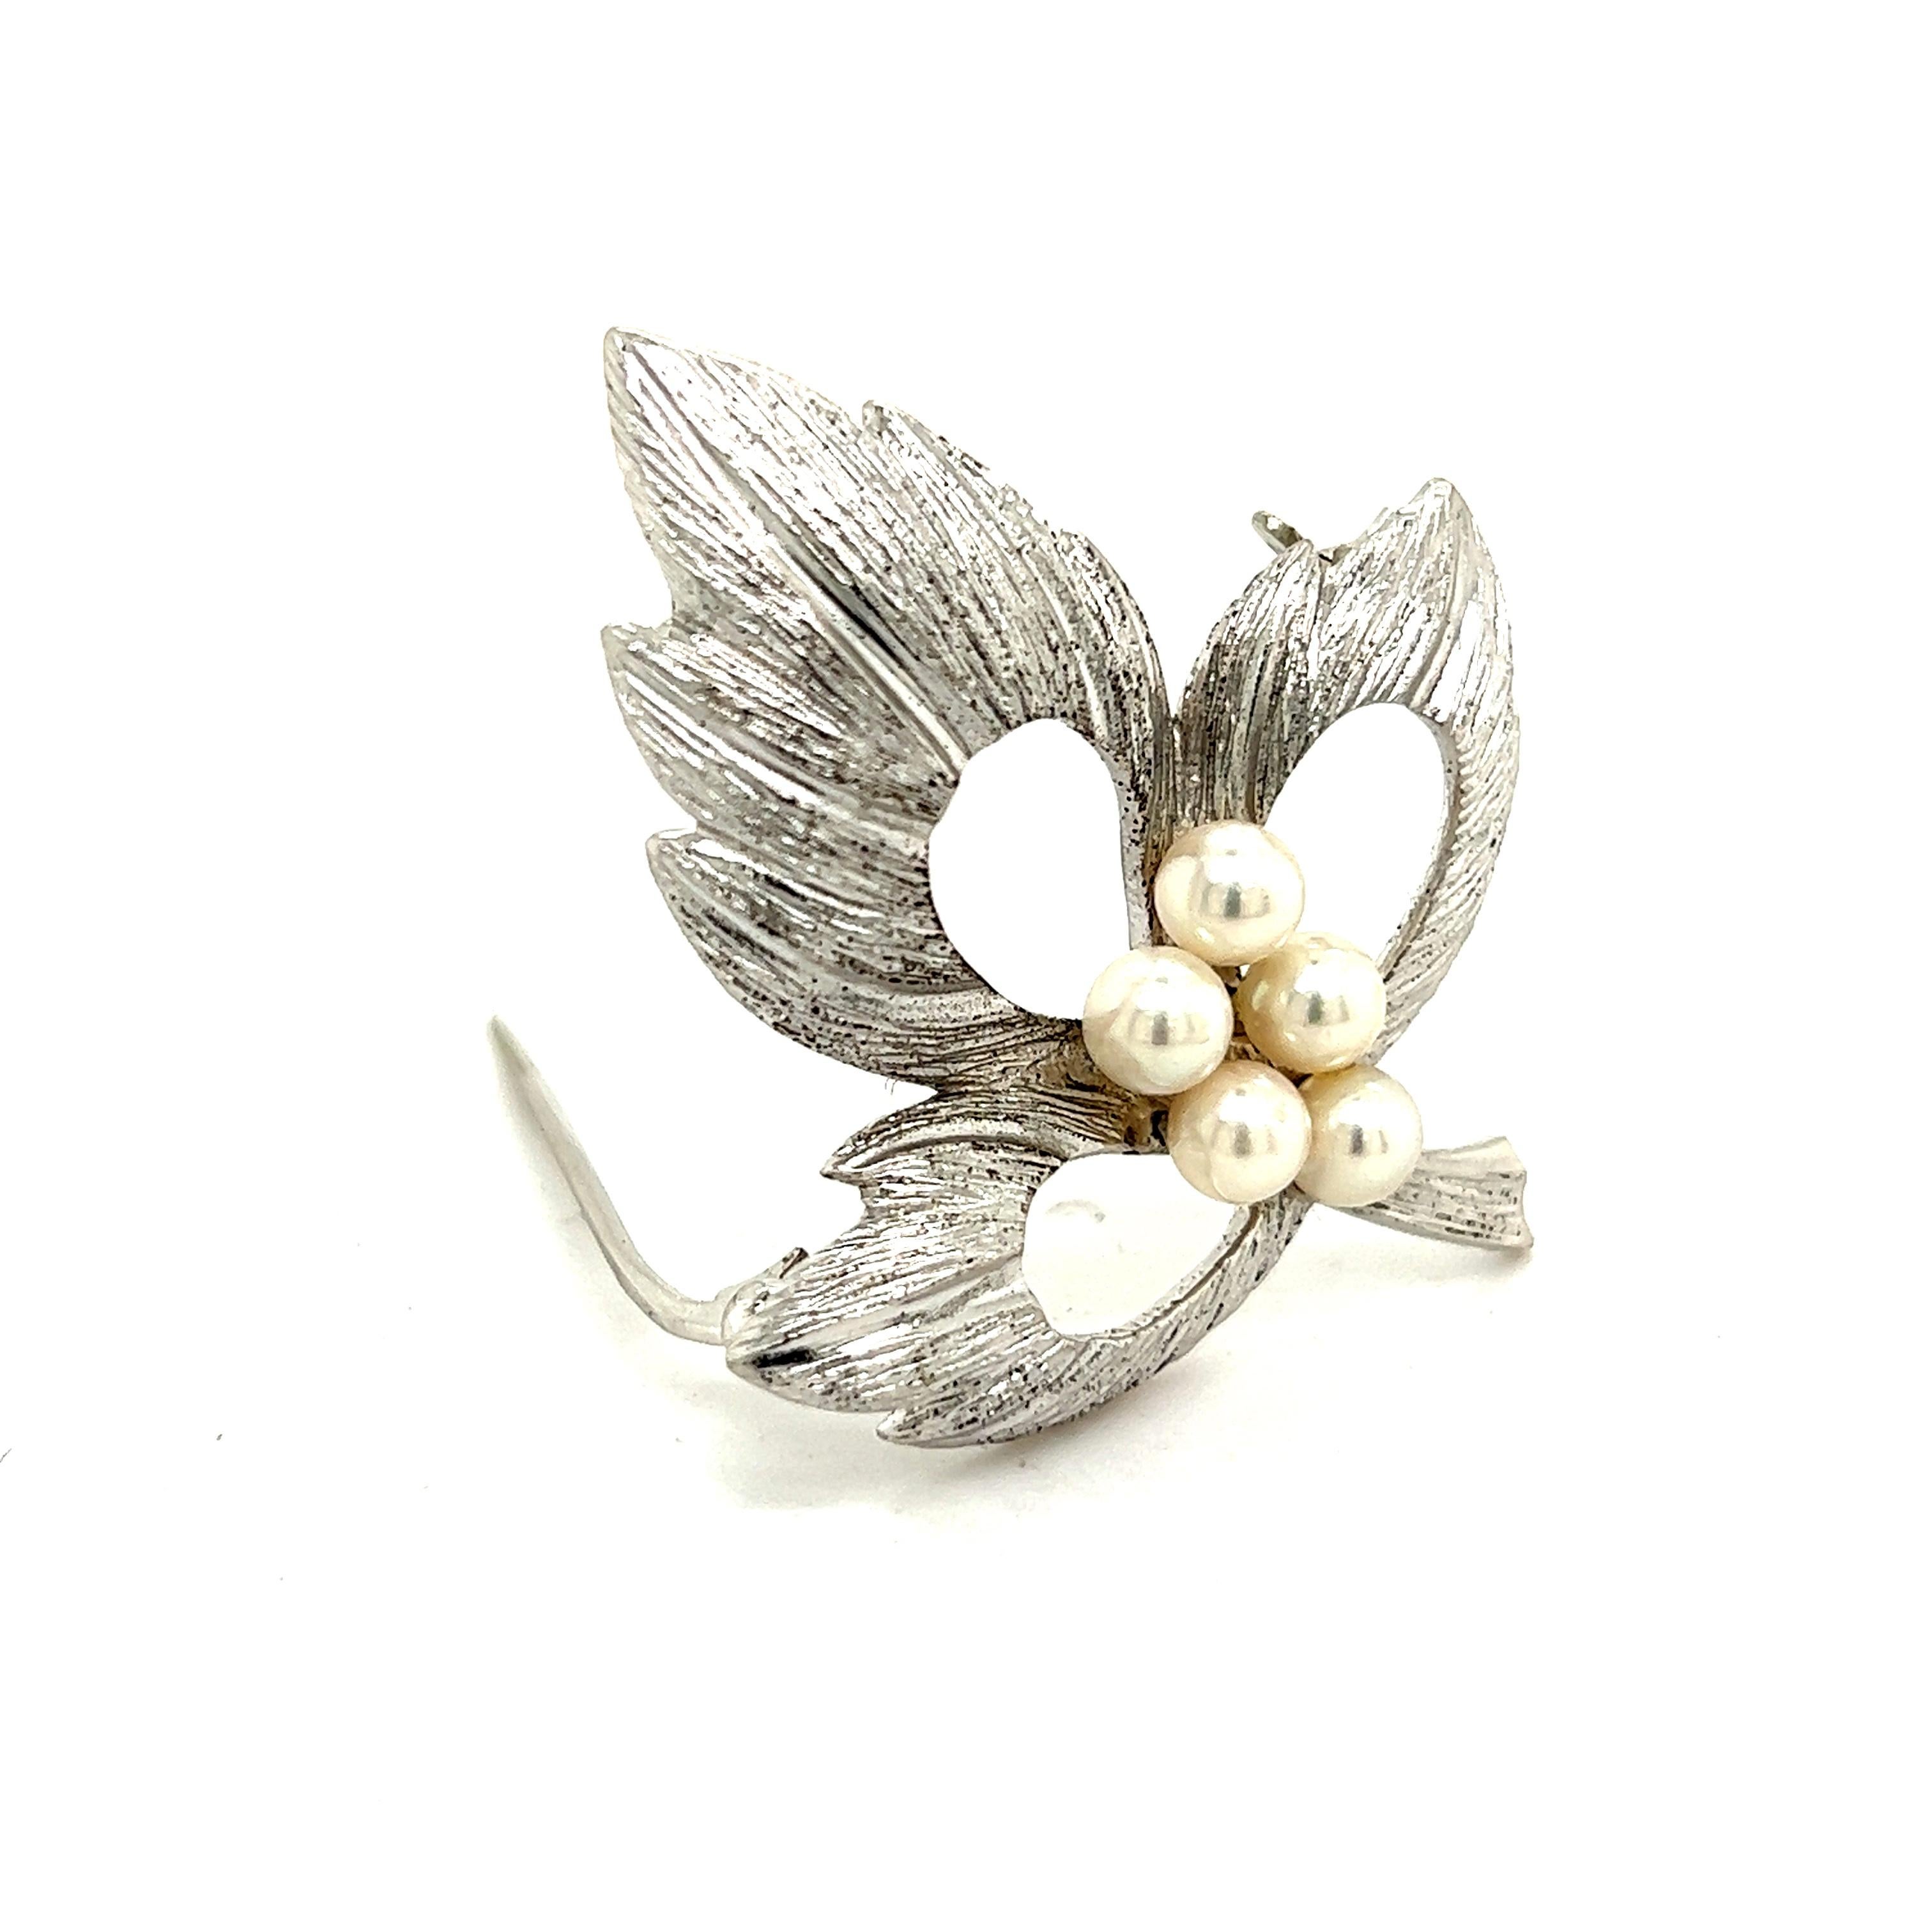 Mikimoto Estate Akoya Pearl Leaf Brooch Pin Sterling Silver 4.5 mm M296

This elegant Authentic Mikimoto Estate Akoya pearl brooch pin is made of sterling silver and has 5 Akoya Cultured Pearls ranging in size from 4.5 mm and a weight of 7.02